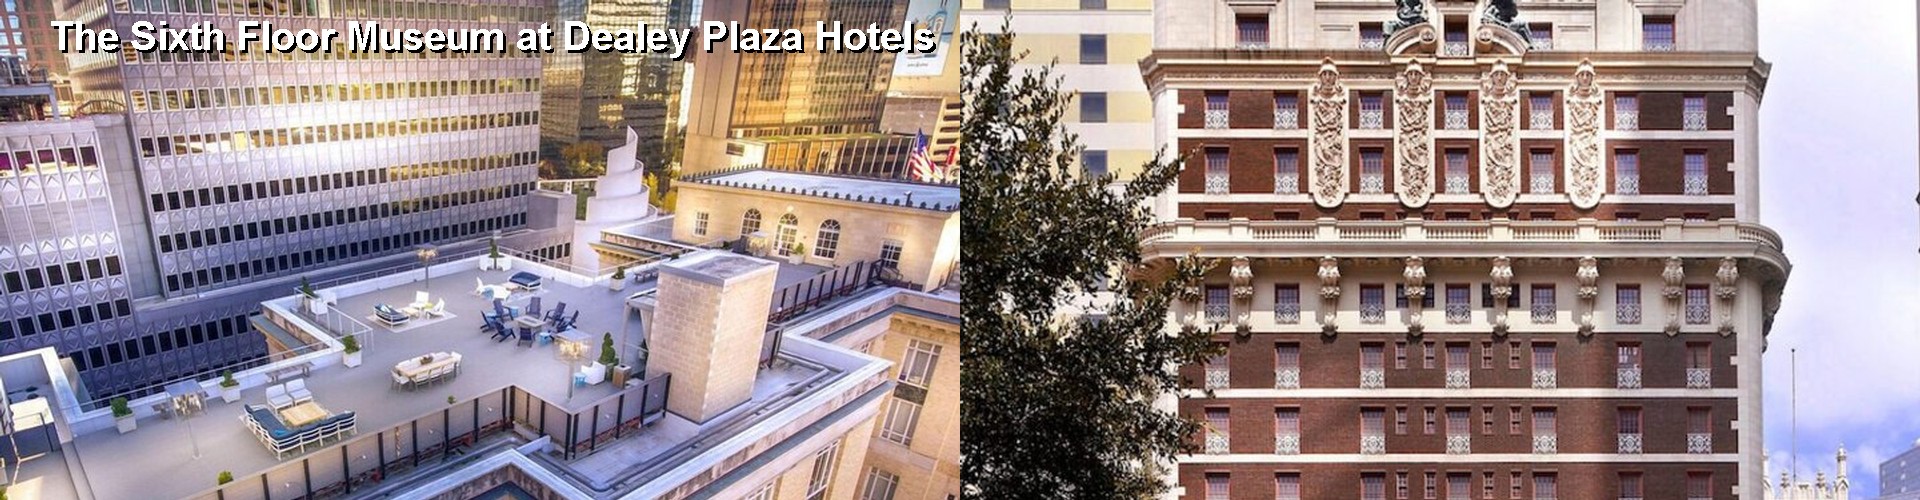 5 Best Hotels near The Sixth Floor Museum at Dealey Plaza